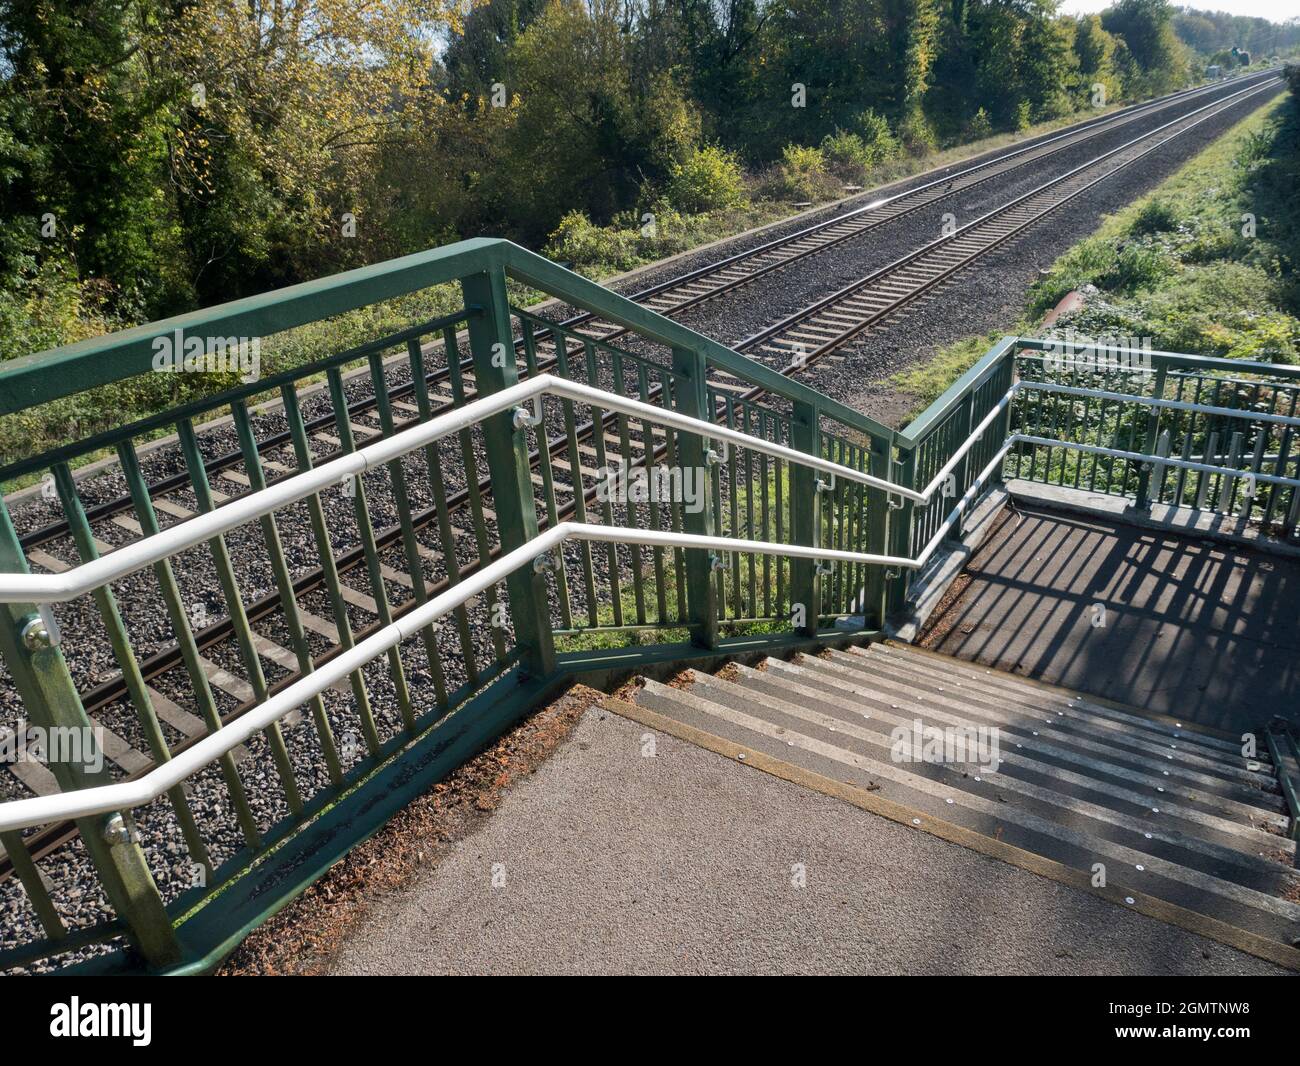 Kennington, Oxfordshire, England - October 2018    Kennington is fortunate to be a small village close to two main line railway station, linking it to Stock Photo